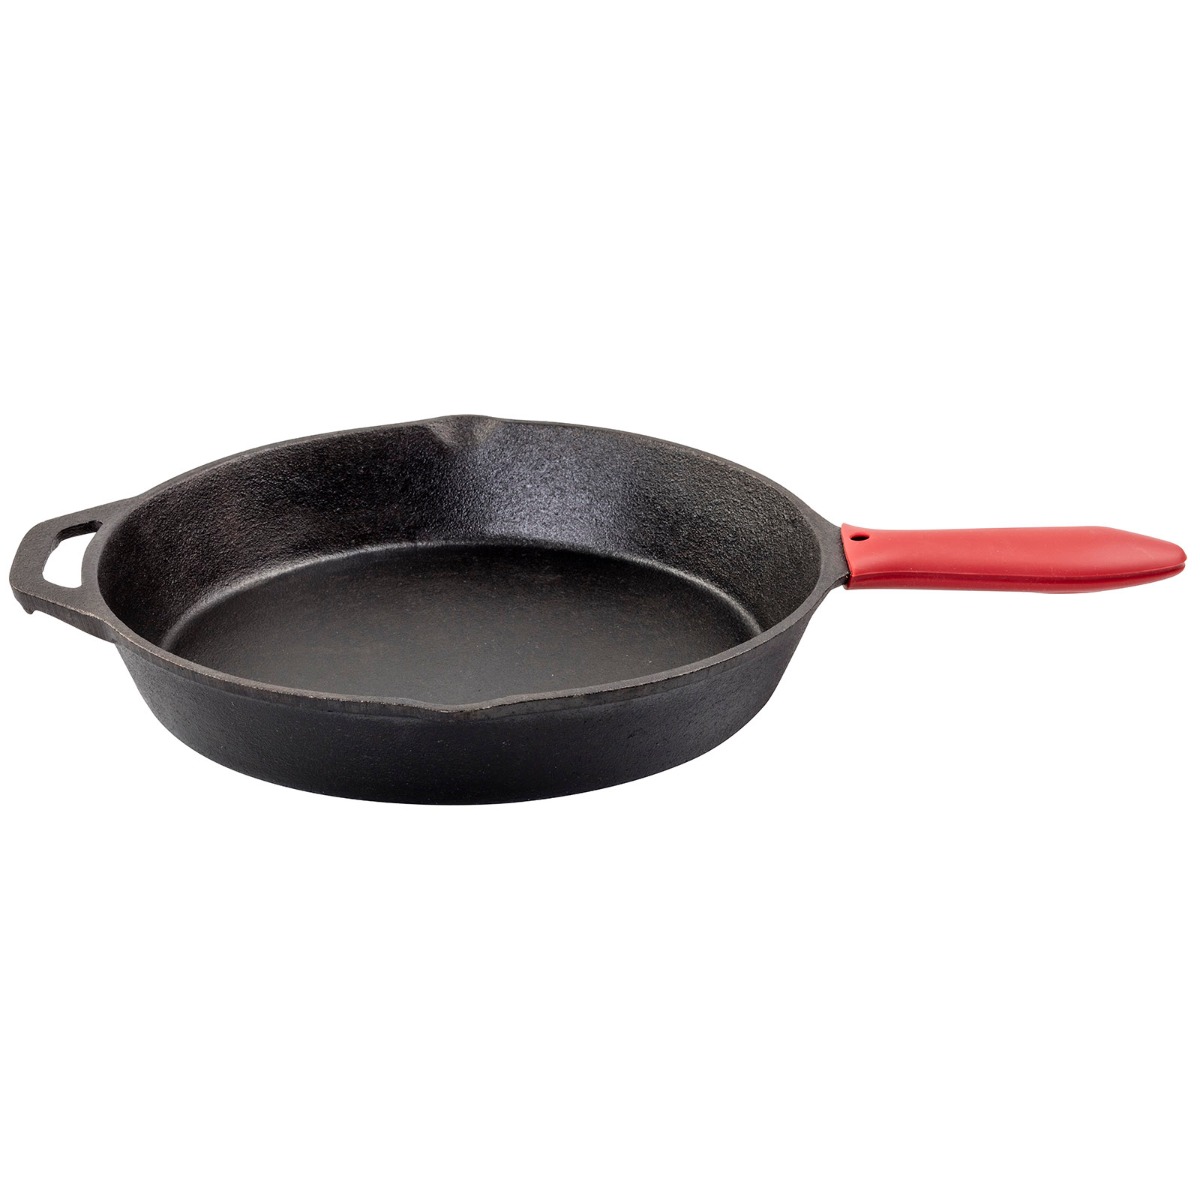 30cm Round Skillet with Silicone Handle